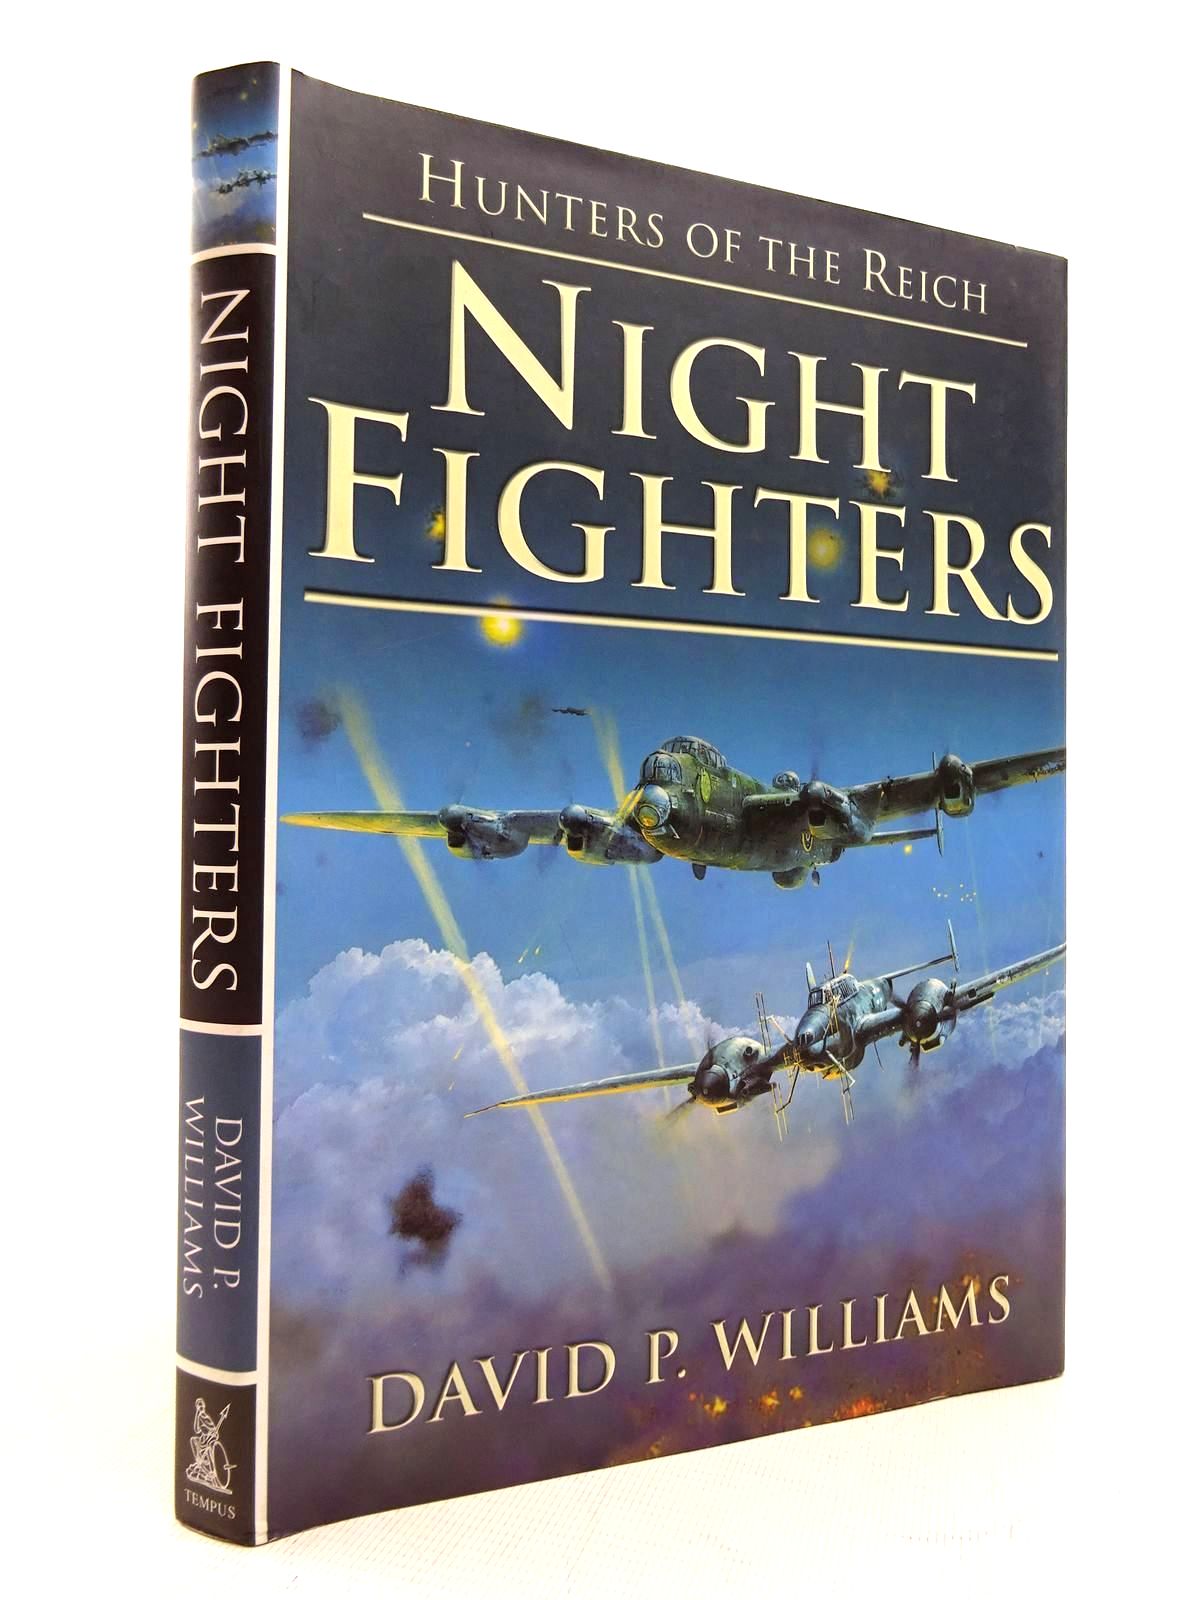 Photo of HUNTERS OF THE REICH VOL. I - NIGHT FIGHTERS written by Williams, David P. published by Tempus (STOCK CODE: 1816093)  for sale by Stella & Rose's Books